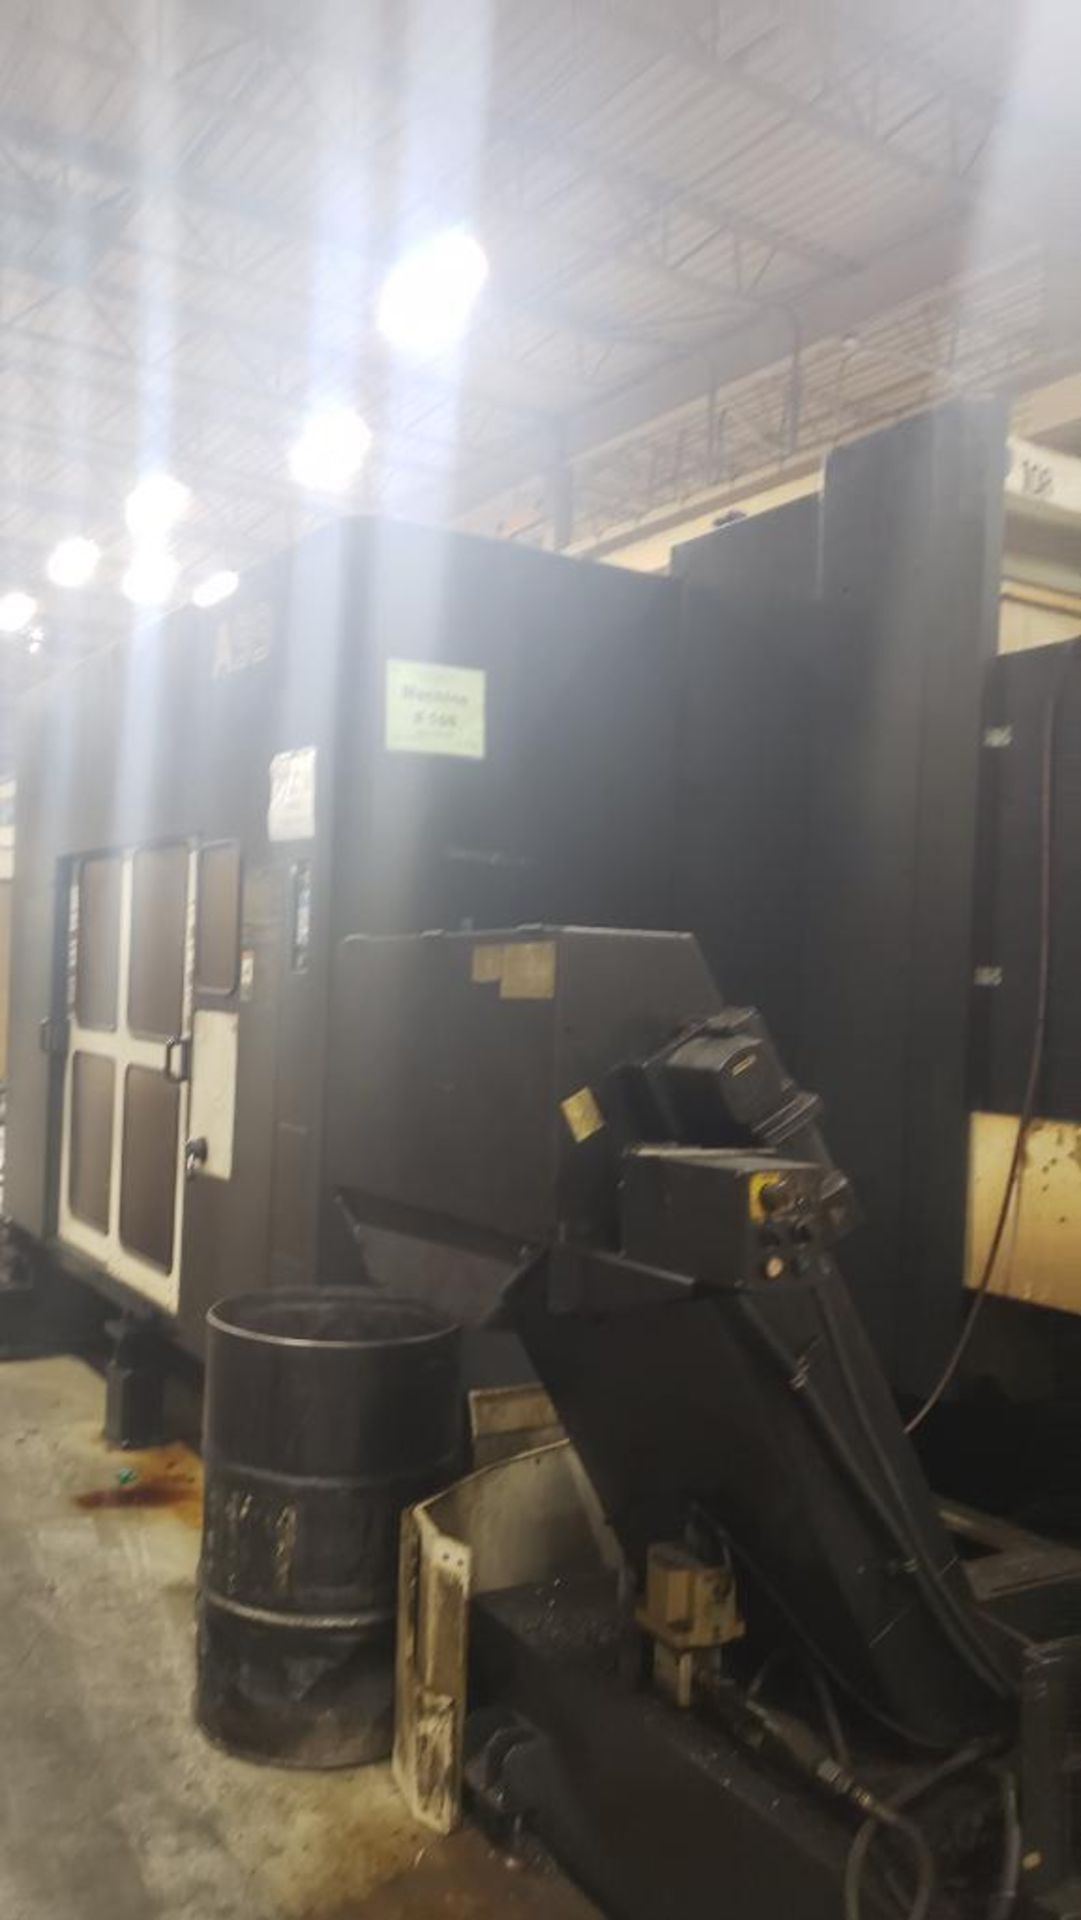 Makino A-99 Dual Pallet with 4-Axis Horizontal Machining Center - Image 11 of 15